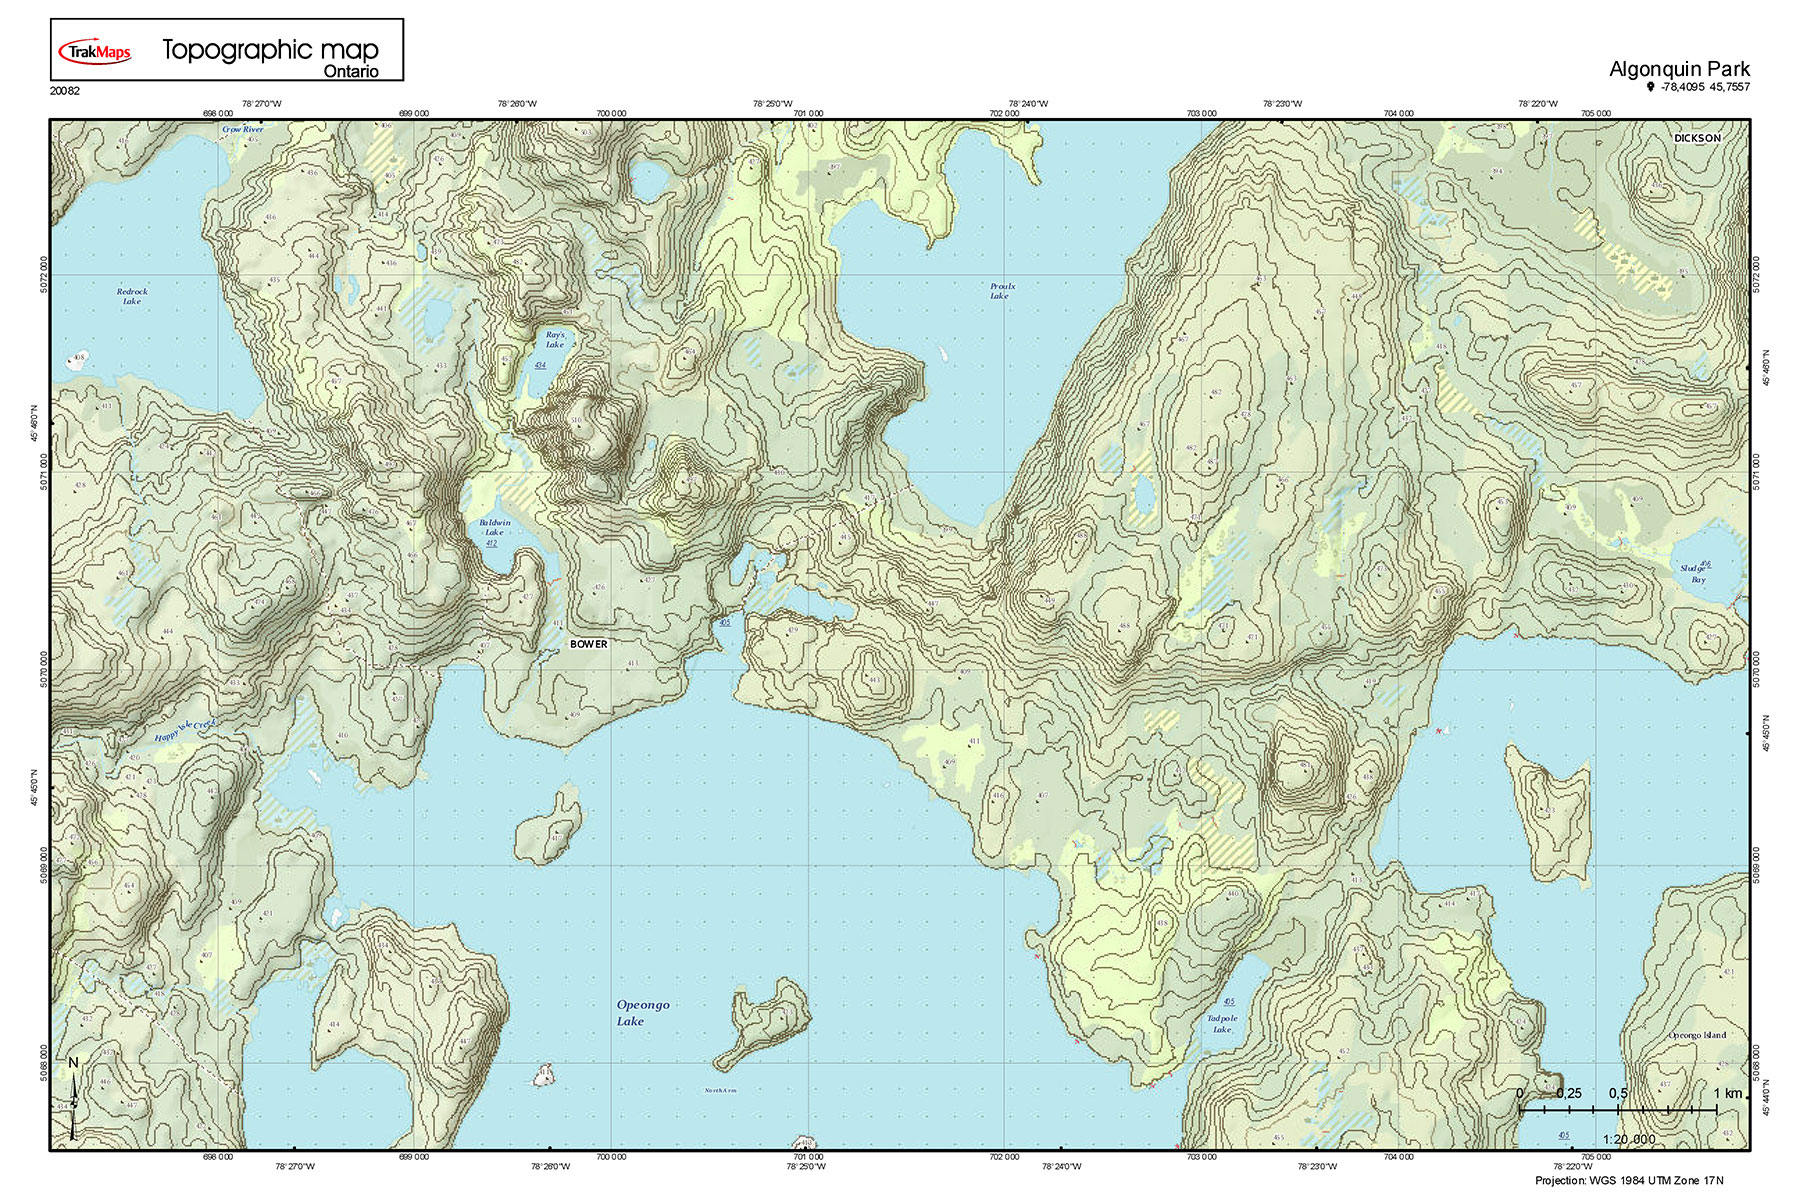 Example 3 of Topographic Map